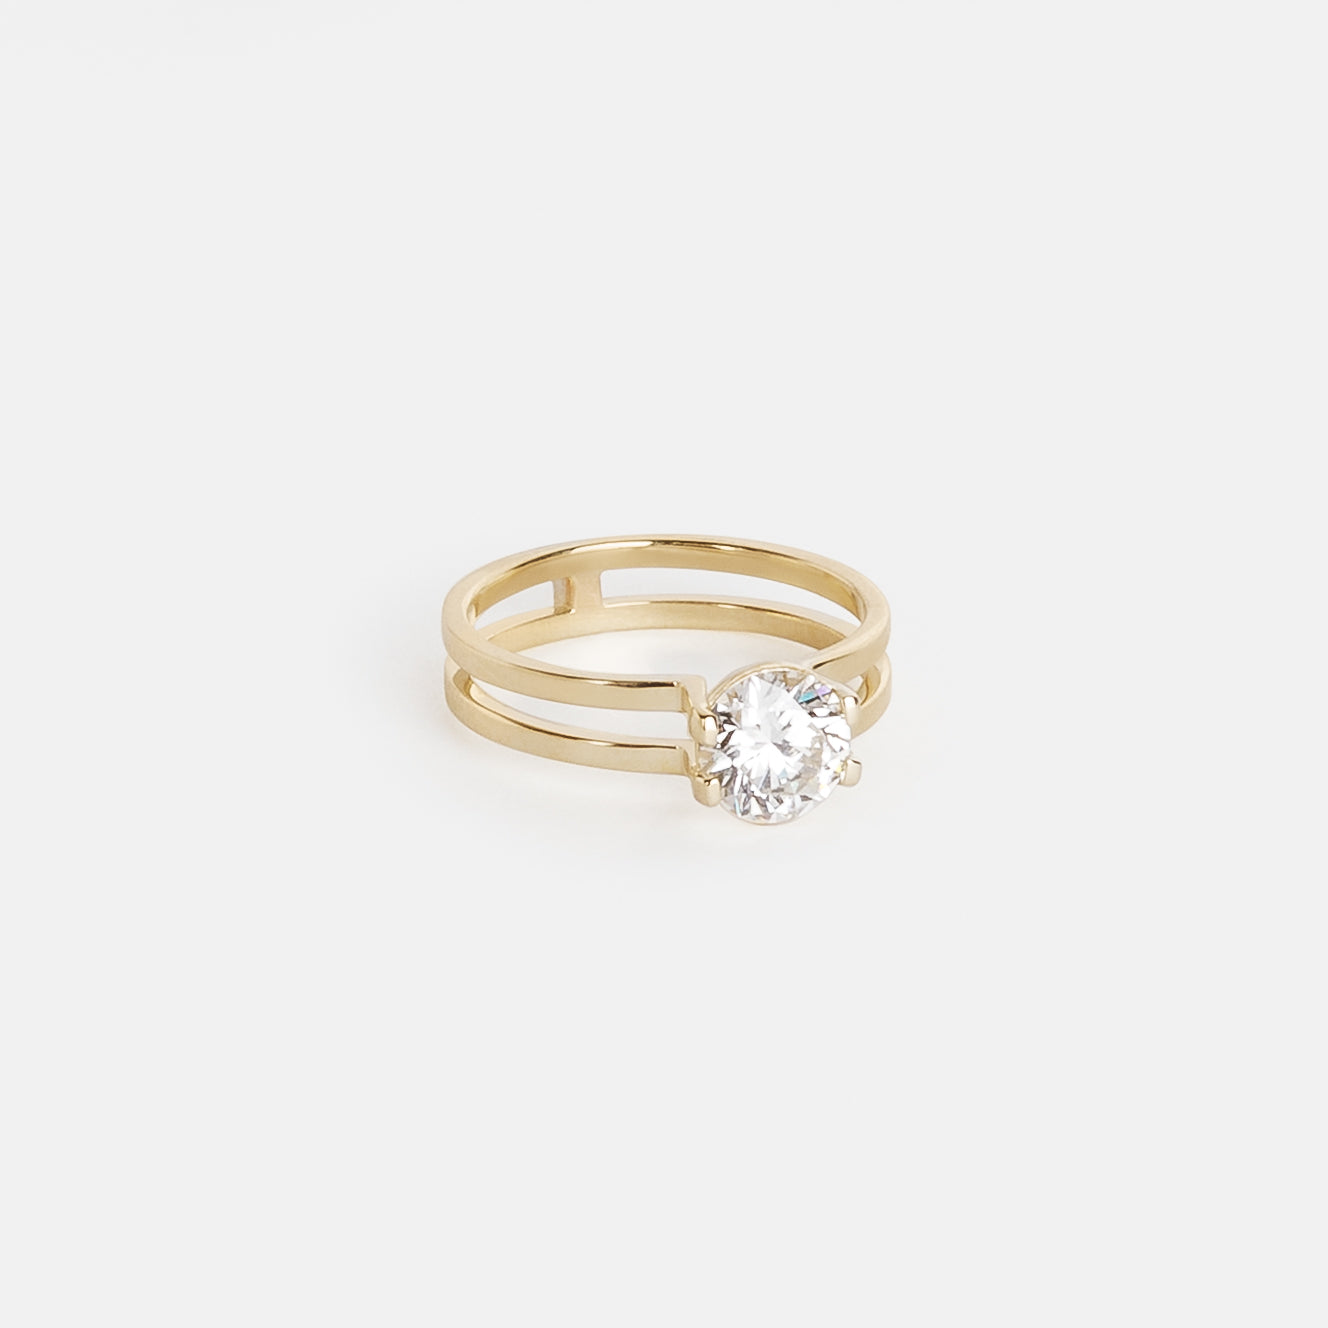 Vedi Unique Ring in 14k Gold set with a 1.01ct round brilliant cut natural diamond By SHW Fine Jewelry NYC